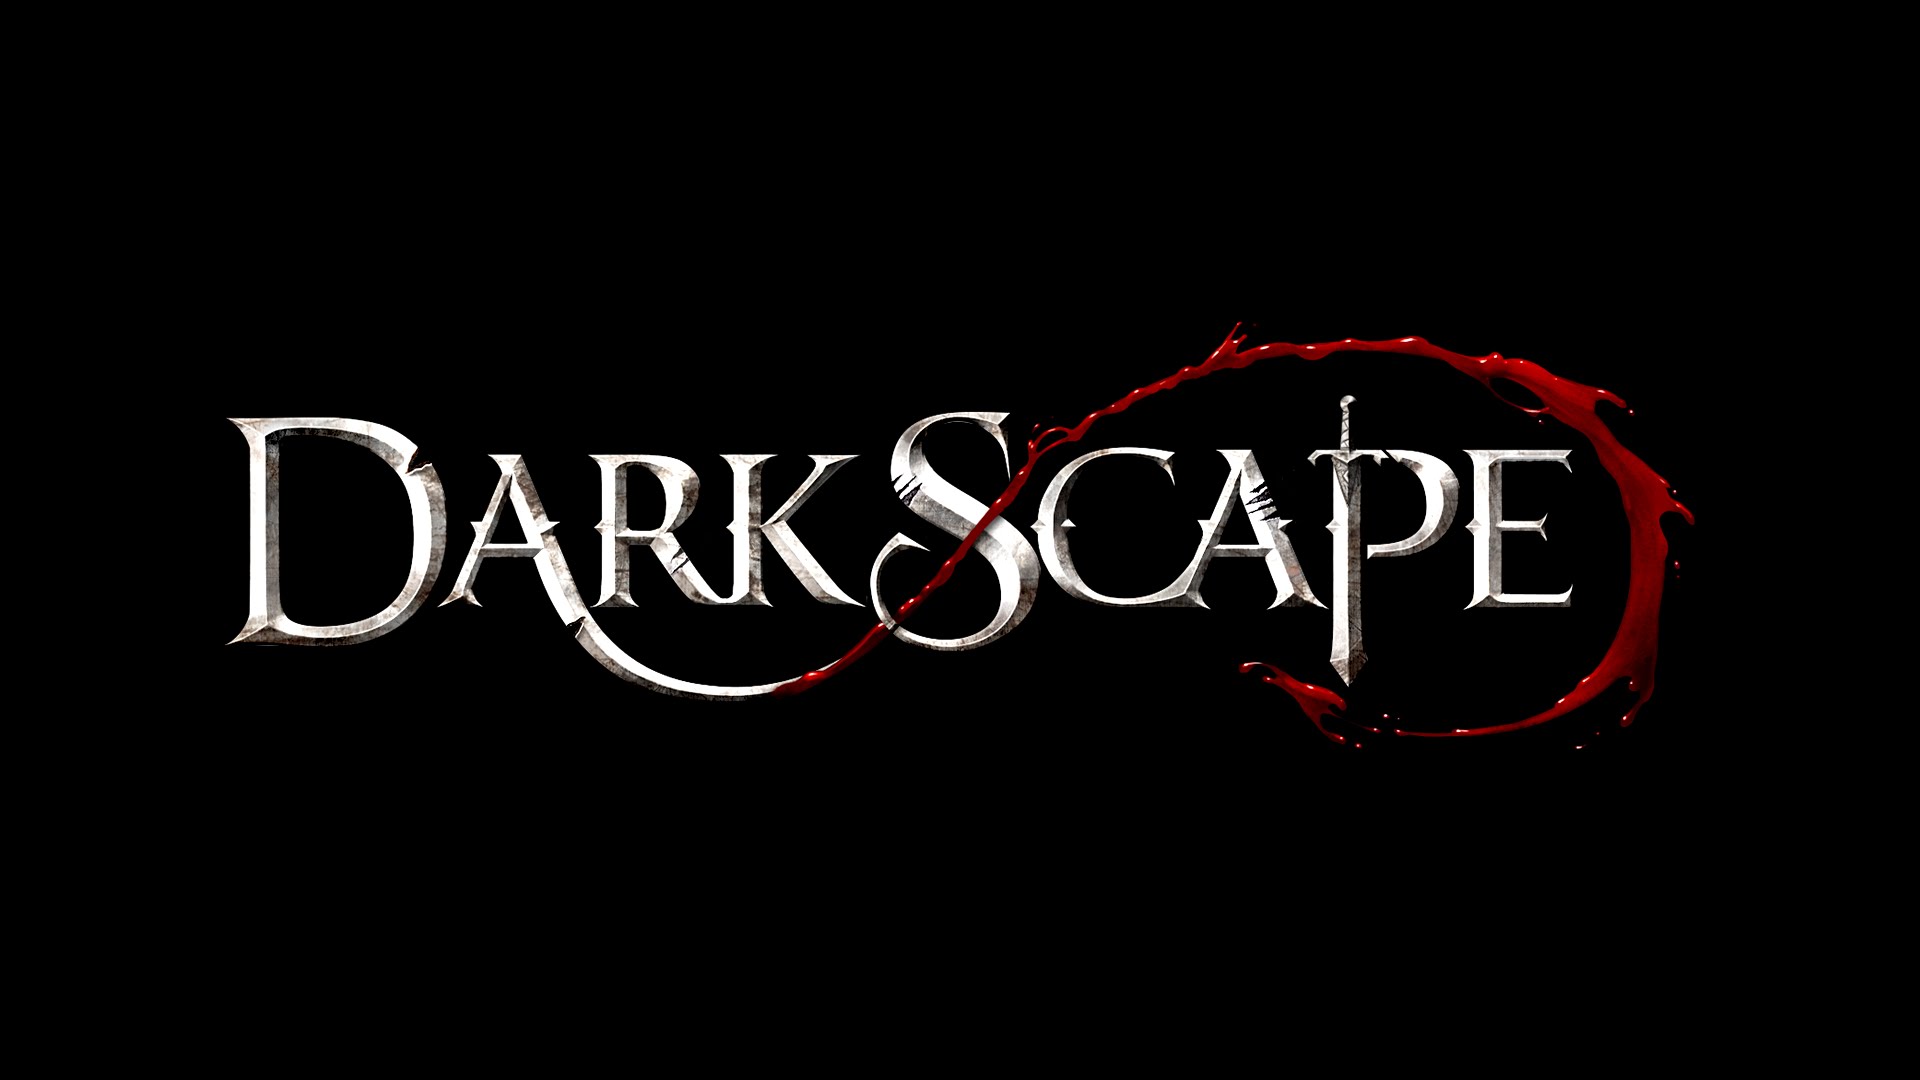 Darkscape Accounts – Never Going to Die